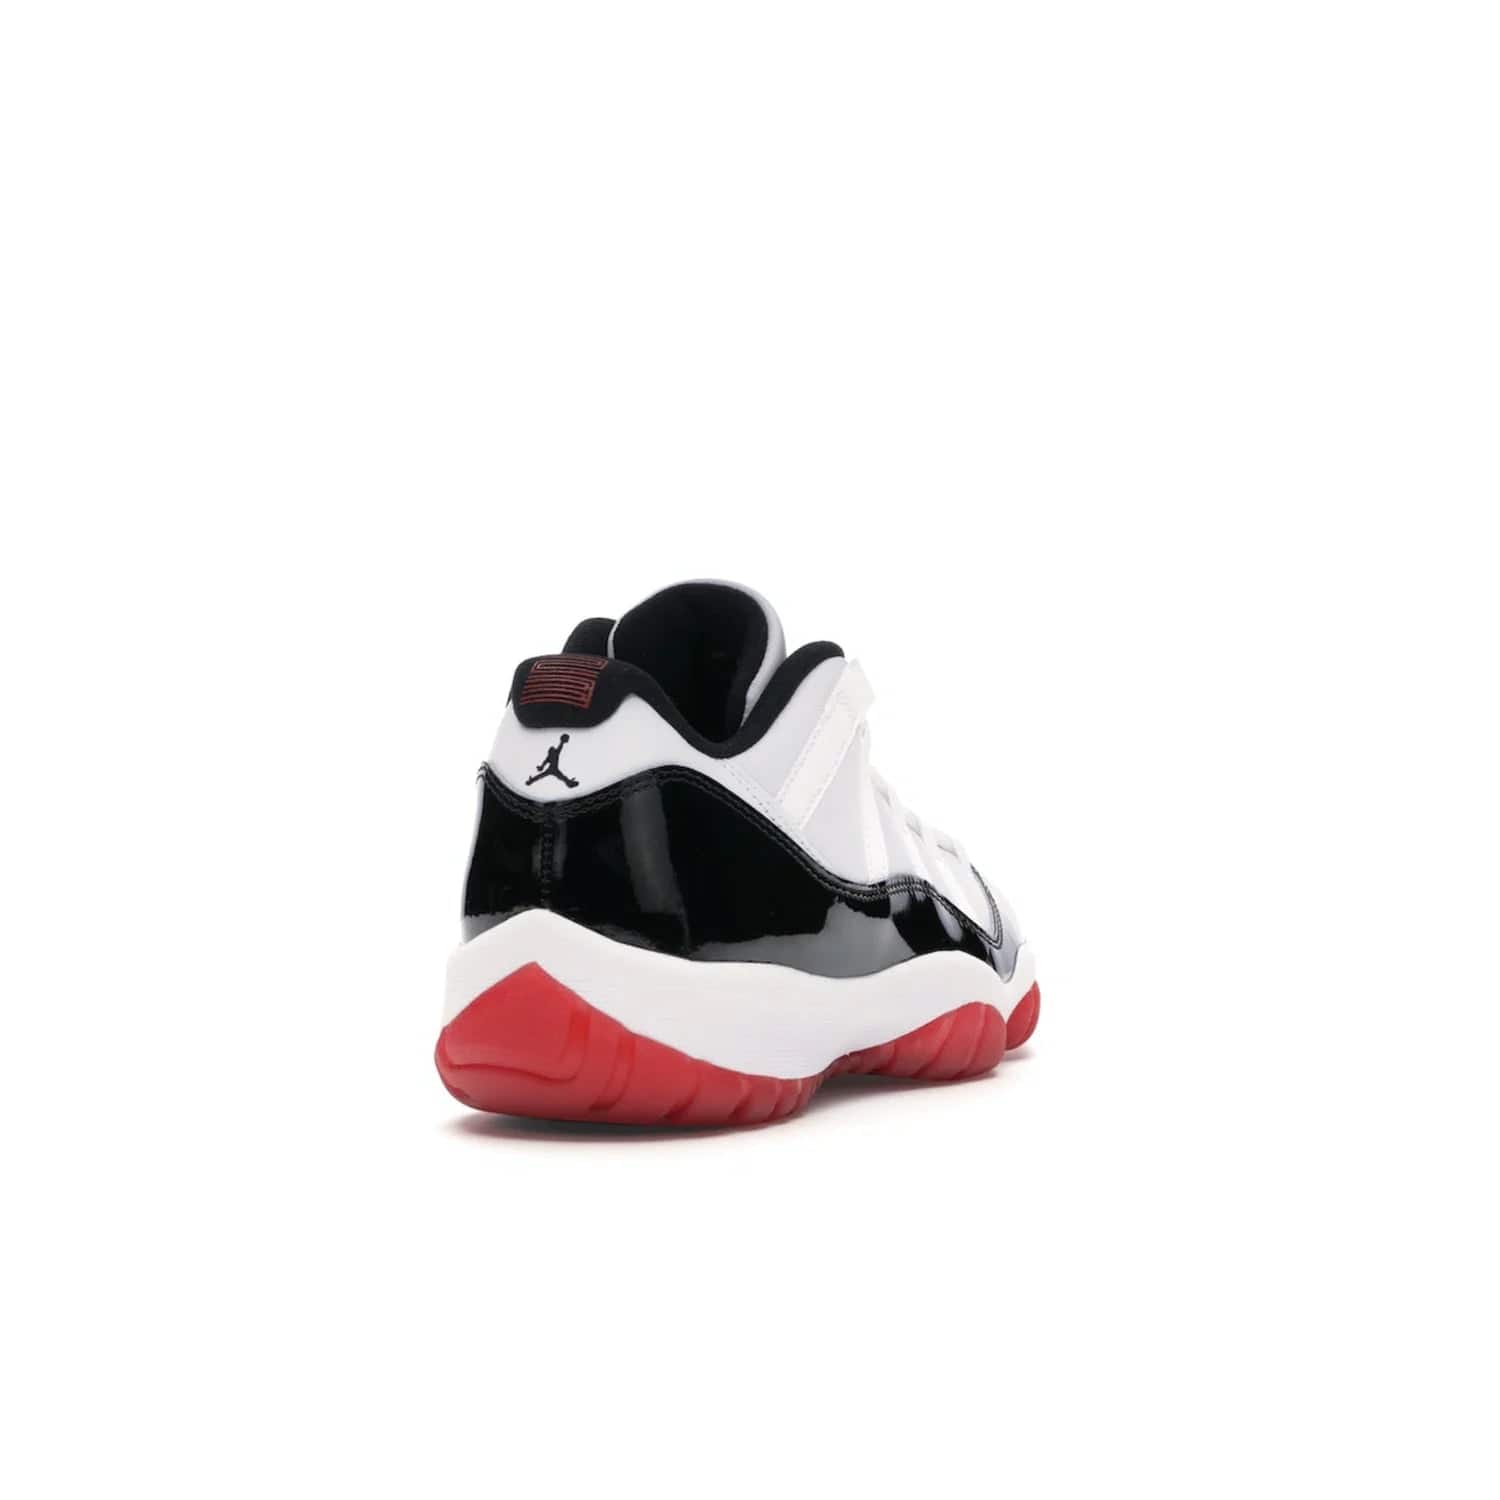 Jordan 11 Retro Low Concord Bred - Image 30 - Only at www.BallersClubKickz.com - Grab the classic Jordan 11 look with the Jordan 11 Retro Low Concord Bred. With white and black elements and the iconic red outsole of the Jordan 11 Bred, you won't miss a beat. Released in June 2020, the perfect complement to any outfit.